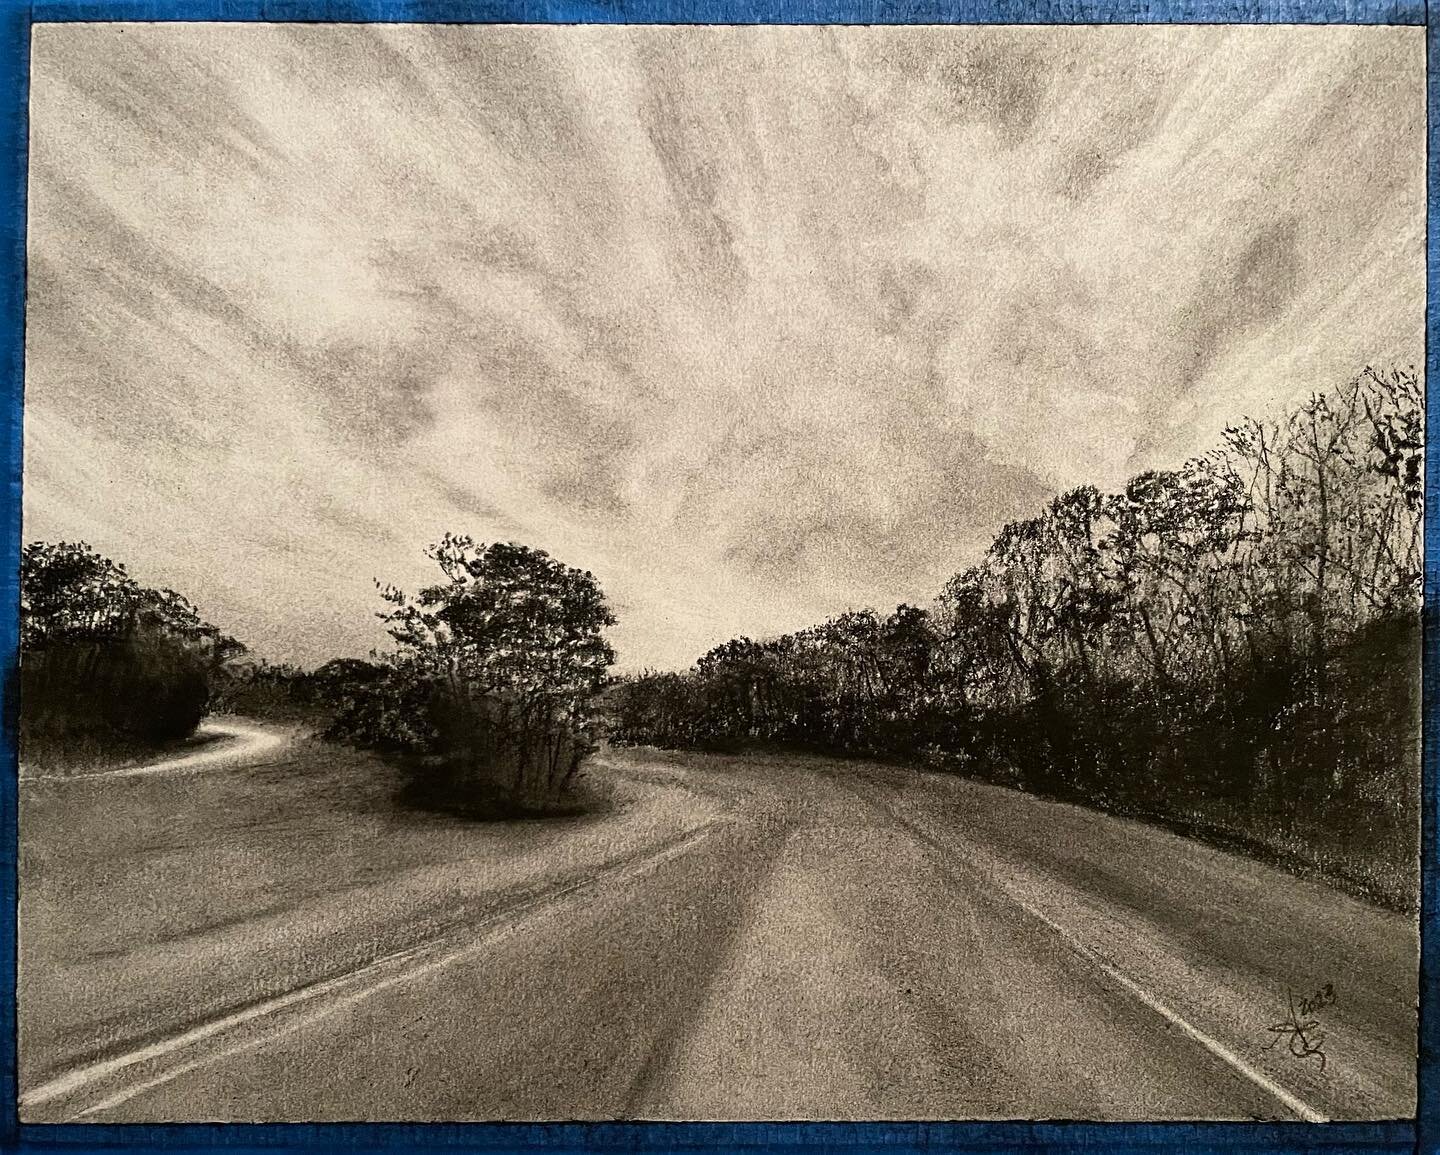 two years (and a bunch of commissions) later.. i&rsquo;m back to drawing landscapes. started off with a small 8x10&rdquo; to get back into it🍂🍁☁️
*
*
#charcoaldrawing #charcoalart #landscape #clouds #trees #road